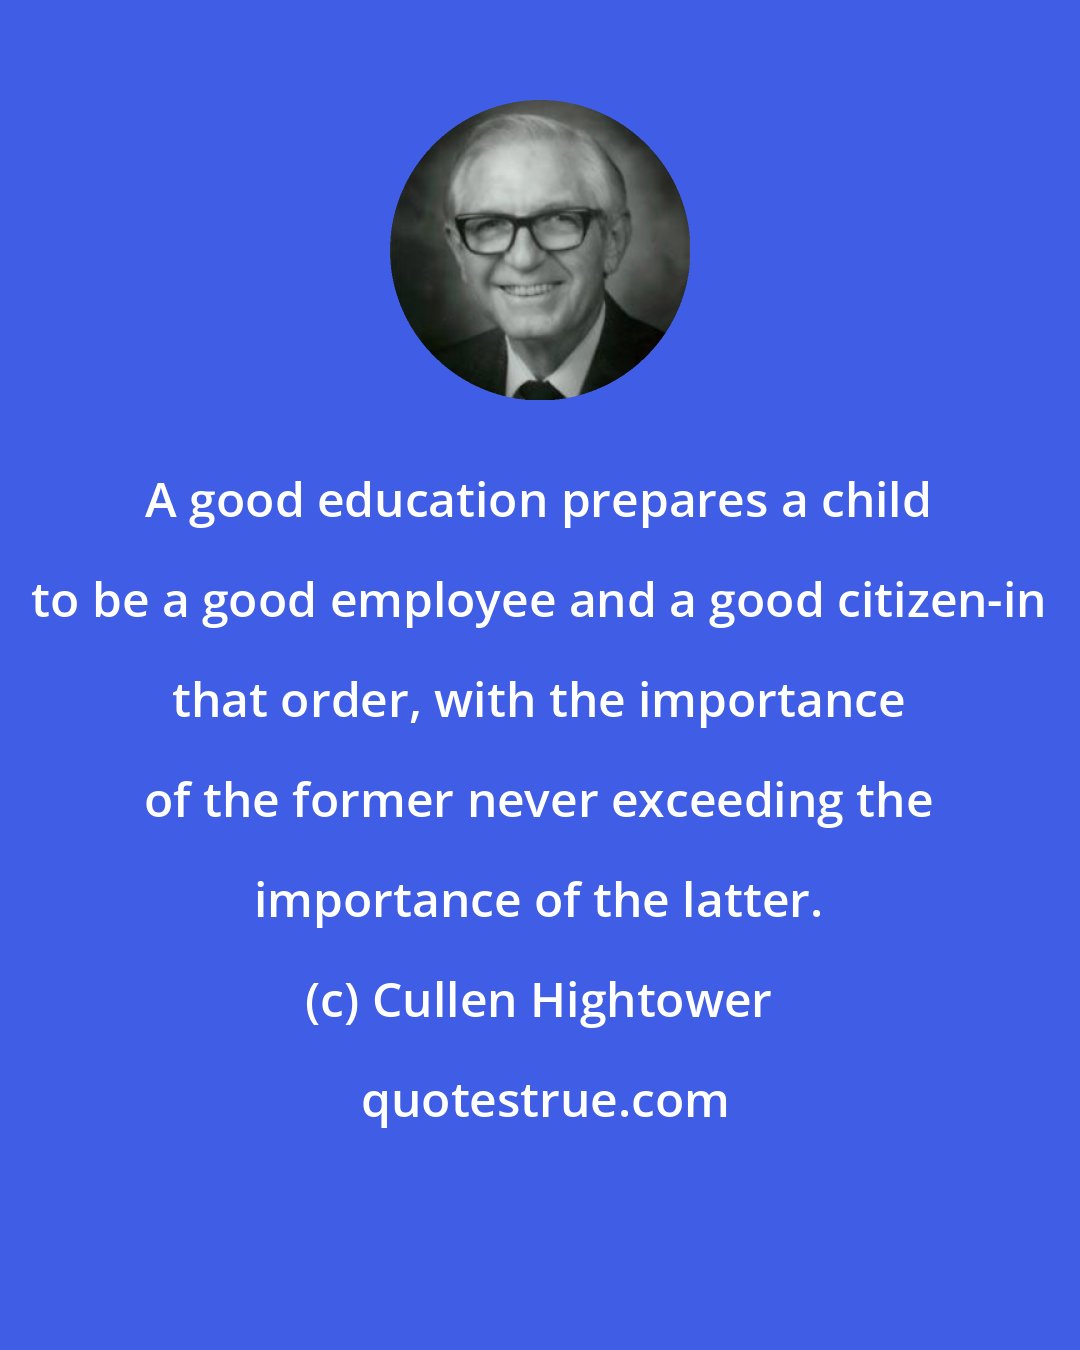 Cullen Hightower: A good education prepares a child to be a good employee and a good citizen-in that order, with the importance of the former never exceeding the importance of the latter.